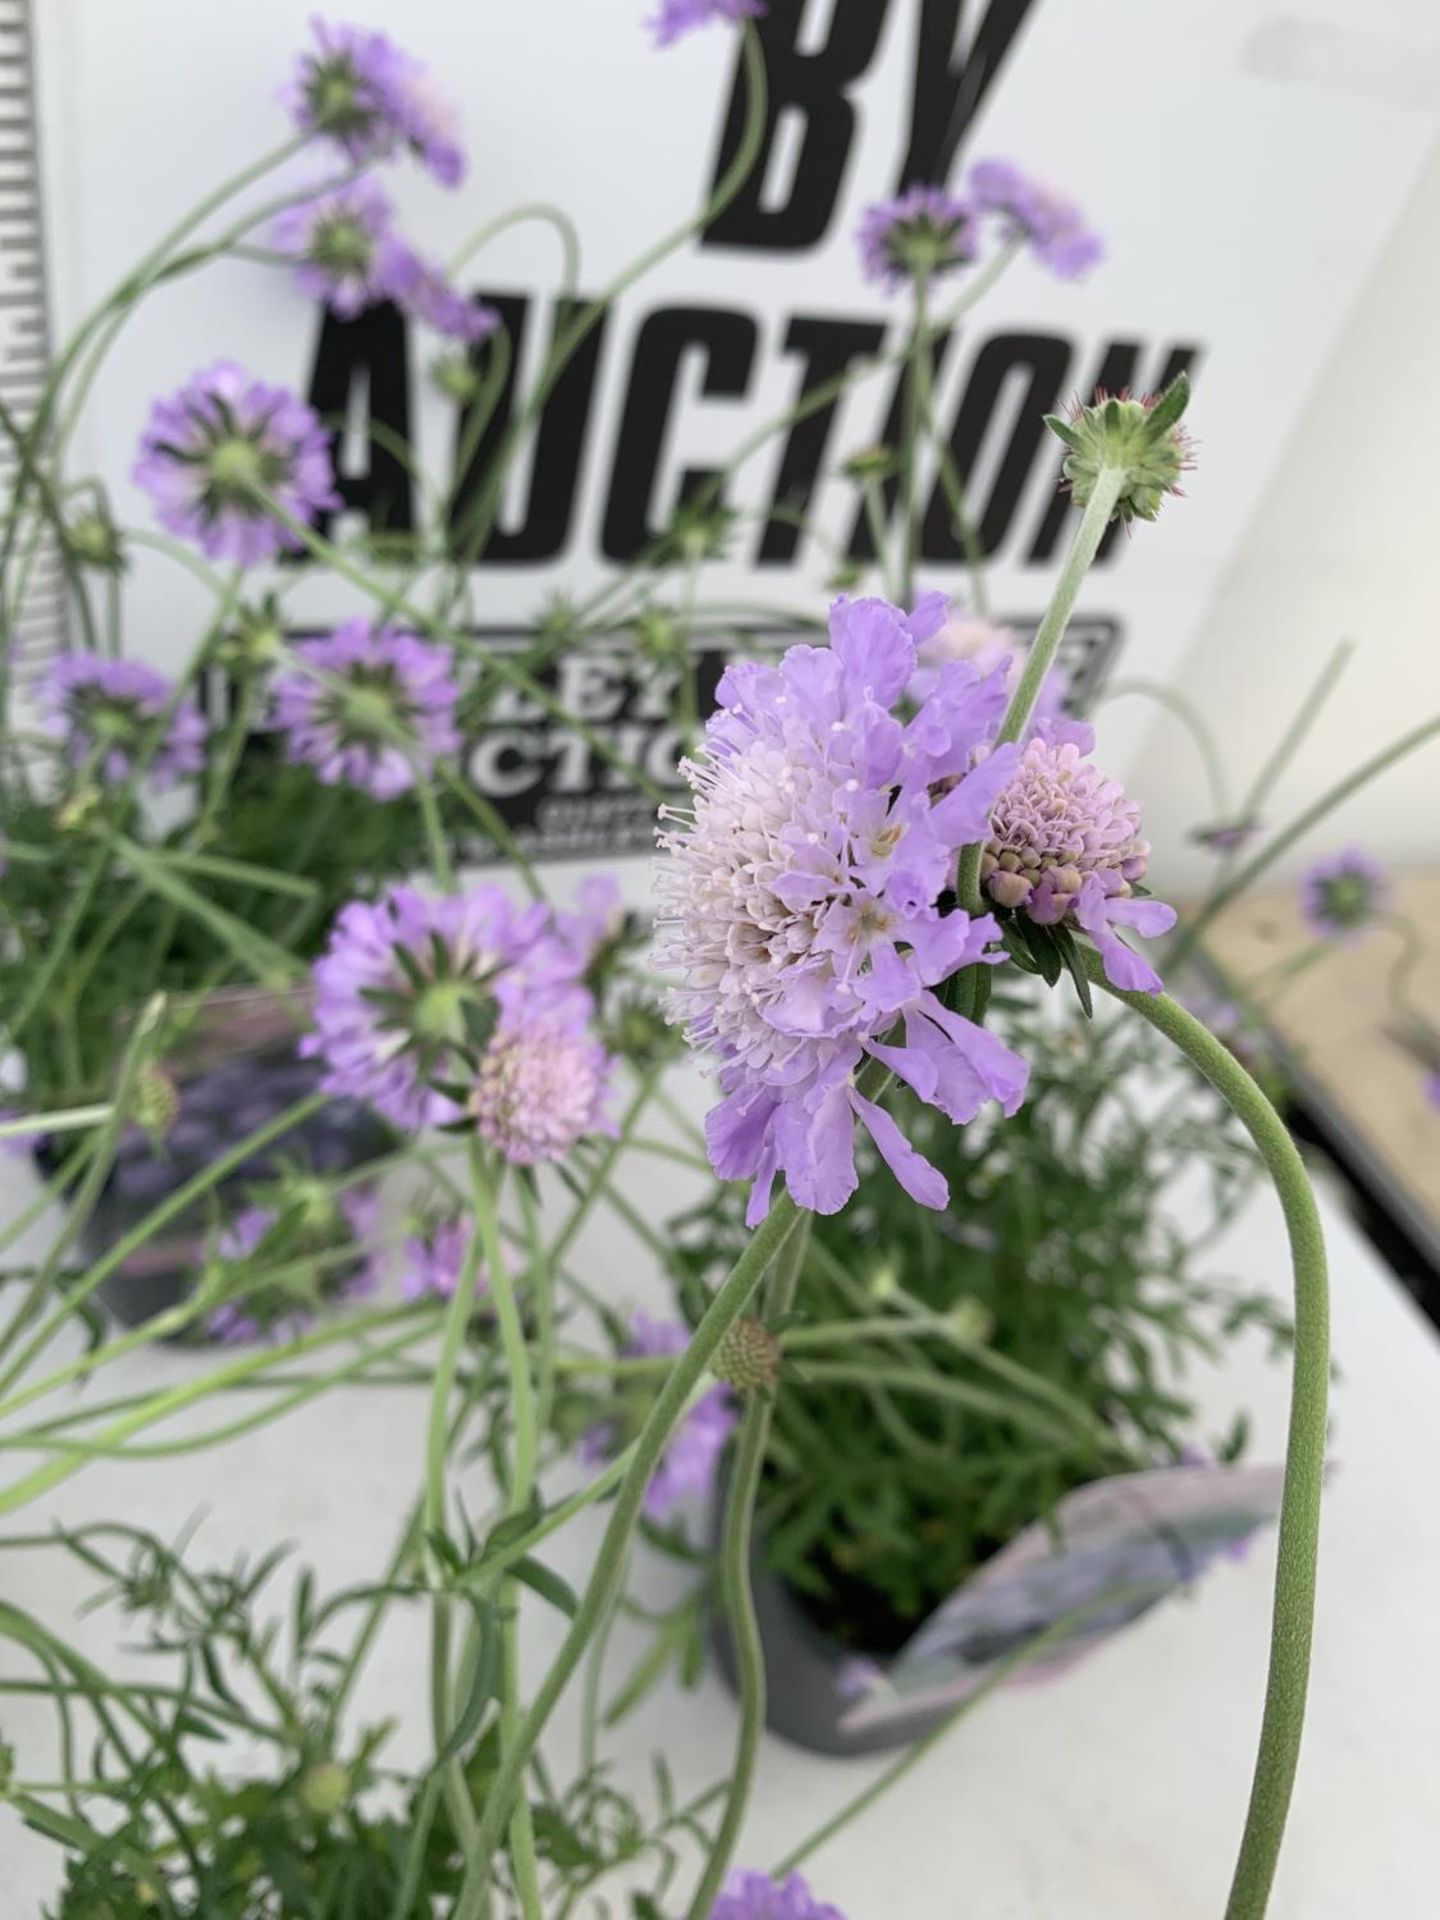 SIX SCABIOSA BUTTERFLY BLUE IN 2 LTR POTS 50-60CM TALL TO BE SOLD FOR THE SIX PLUS VAT - Image 5 of 8